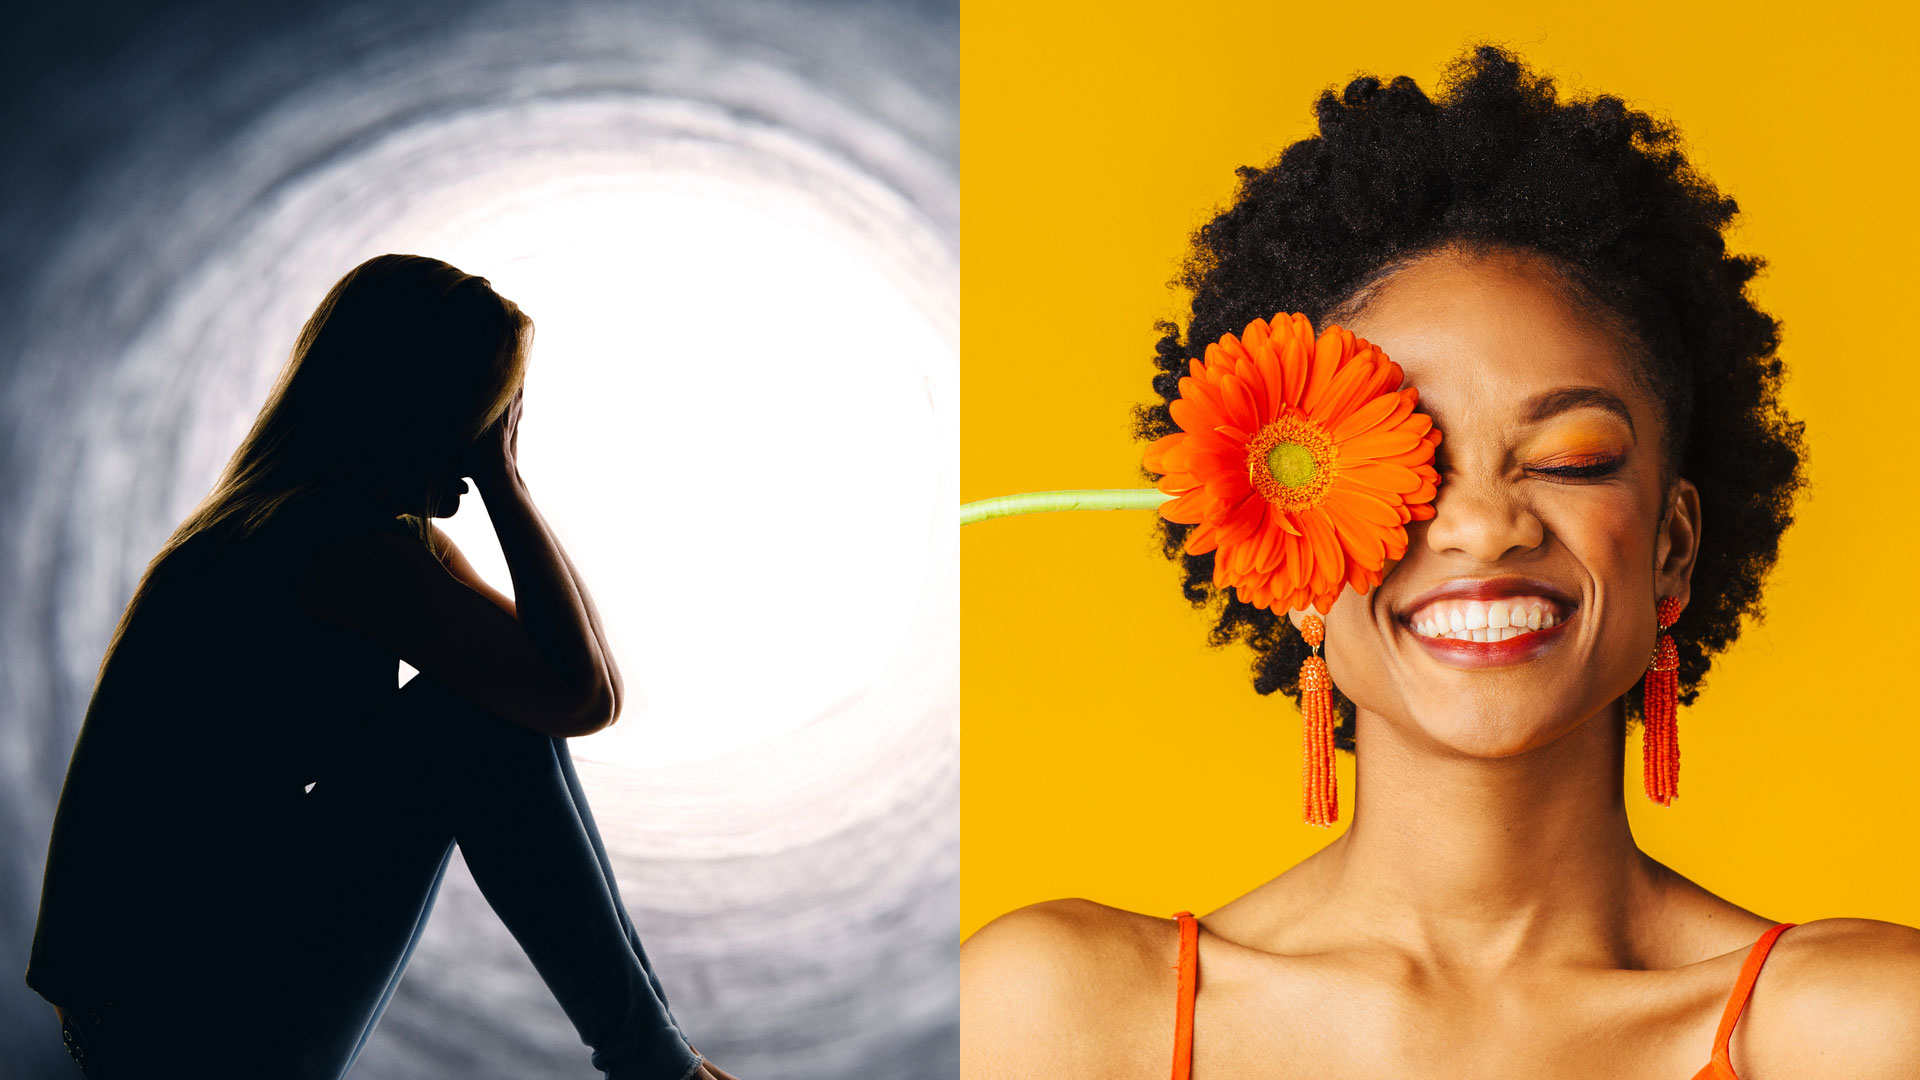 Two contrasting images in one. On the left, a said woman against grey background with hands to her face. On the right, a happy women with a bright flower next to her face against a bright yellow background